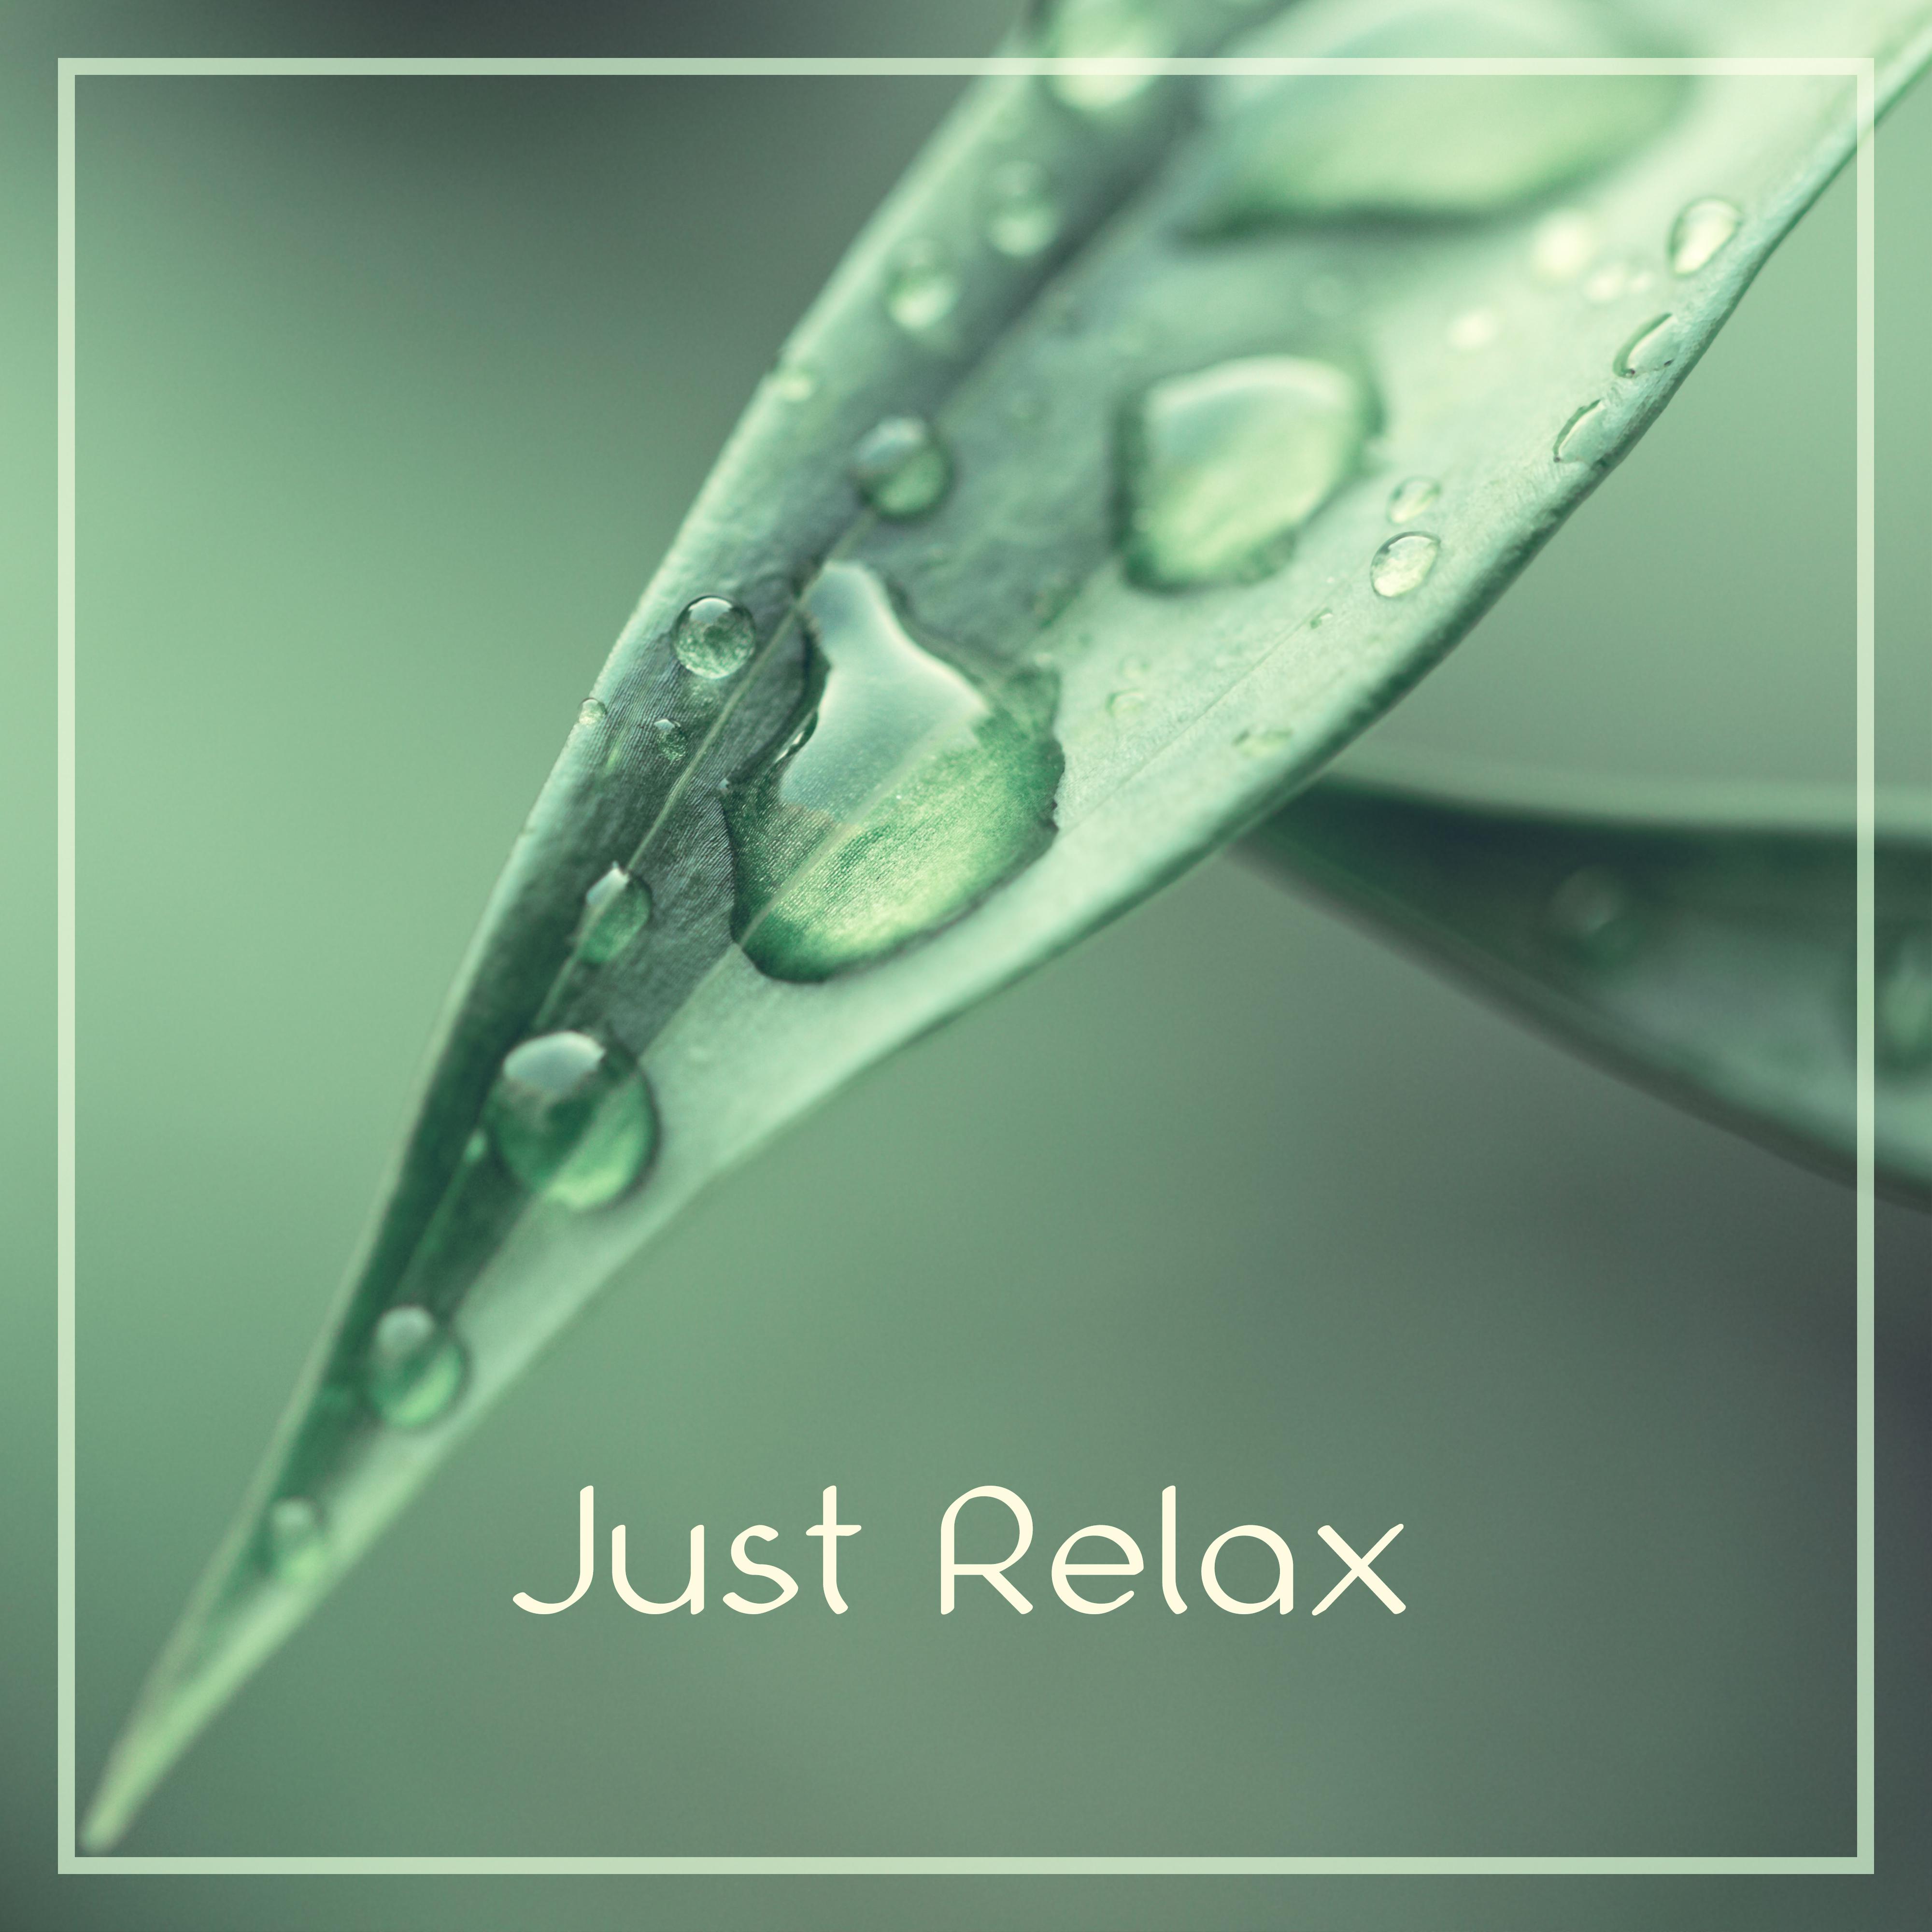 Just Relax  New Age Music, Pure Relaxation, Rest, Deep Sounds of Nature, Instrumental